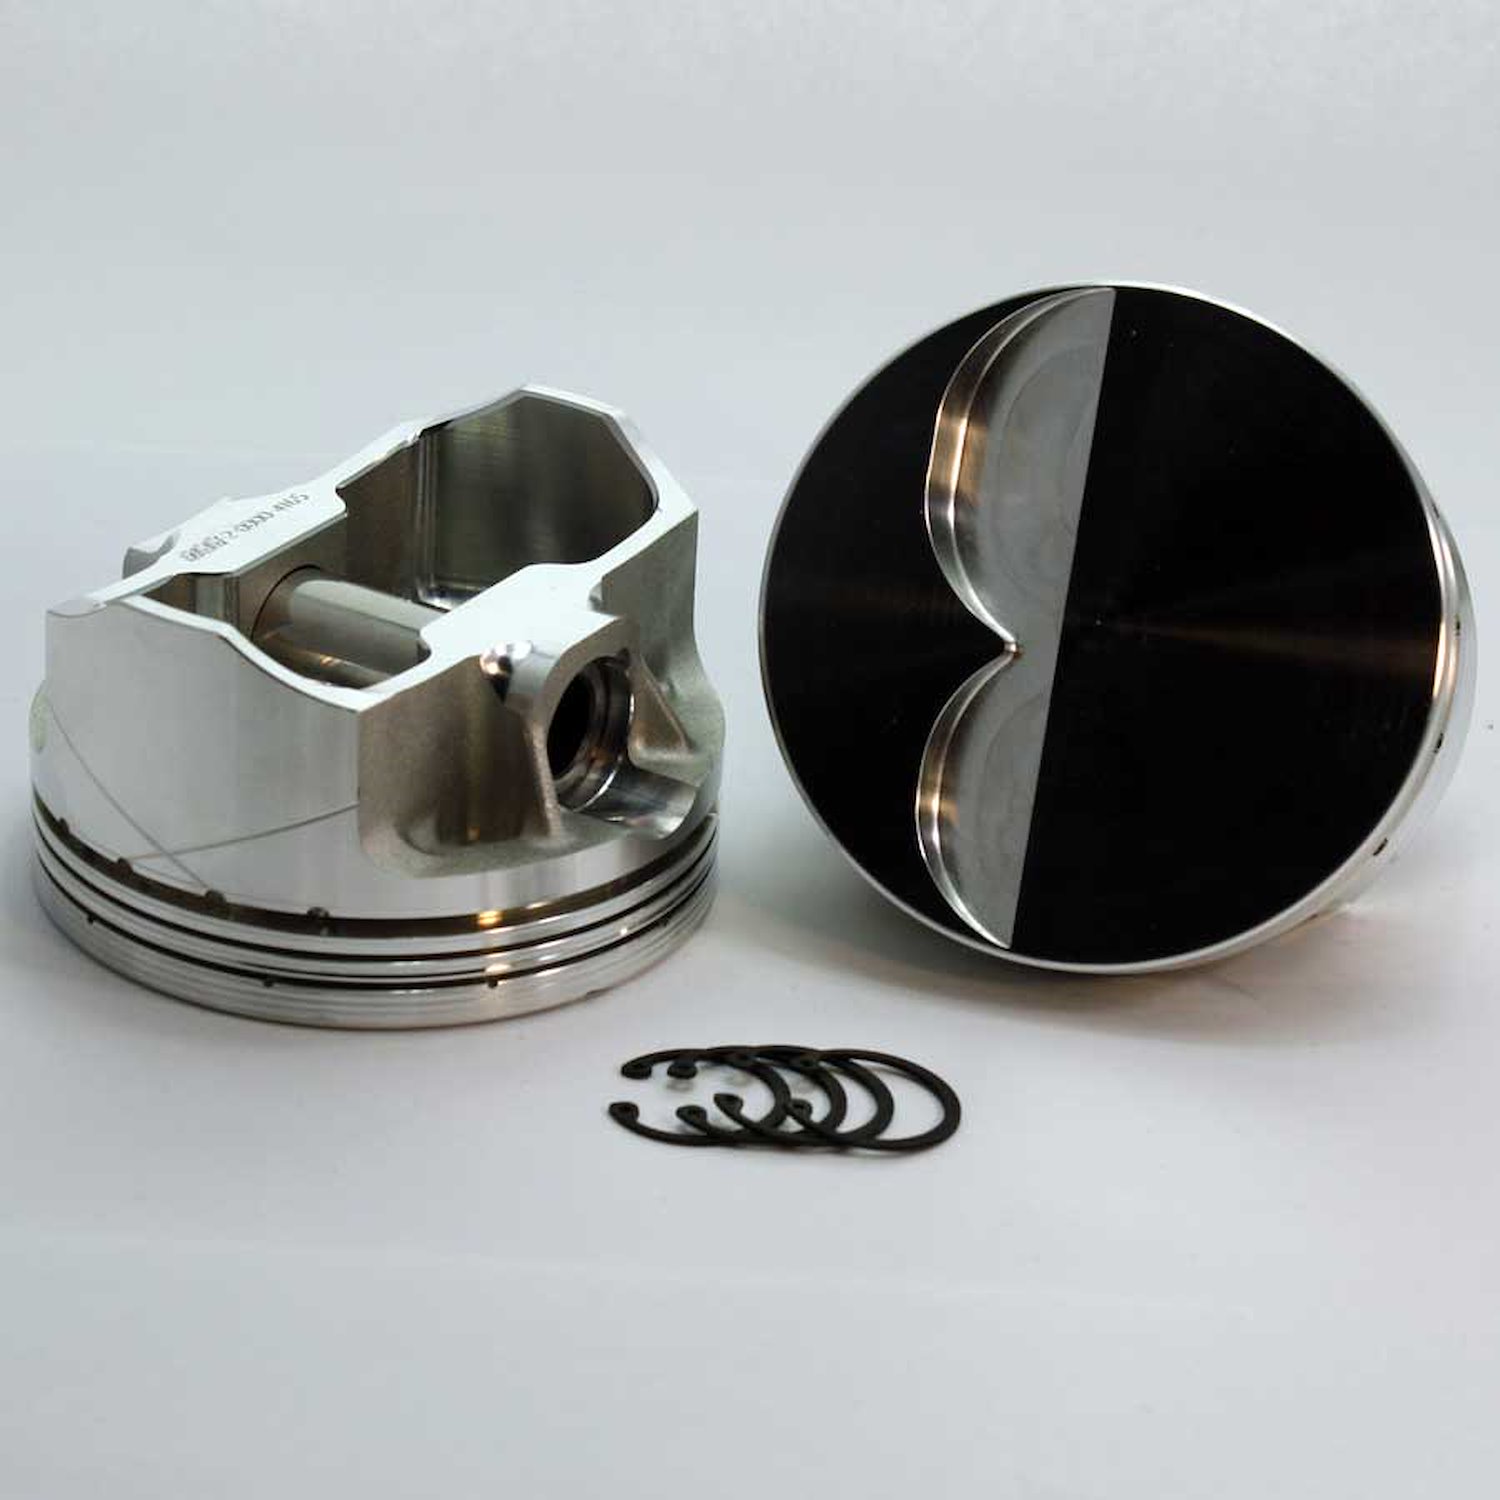 1-3400-4060 FX-Series Flat Top Piston Set for 1962-2001 Small Block Ford 289-302, 4.060 in. Bore, -4cc Volume [OEM Stroke]